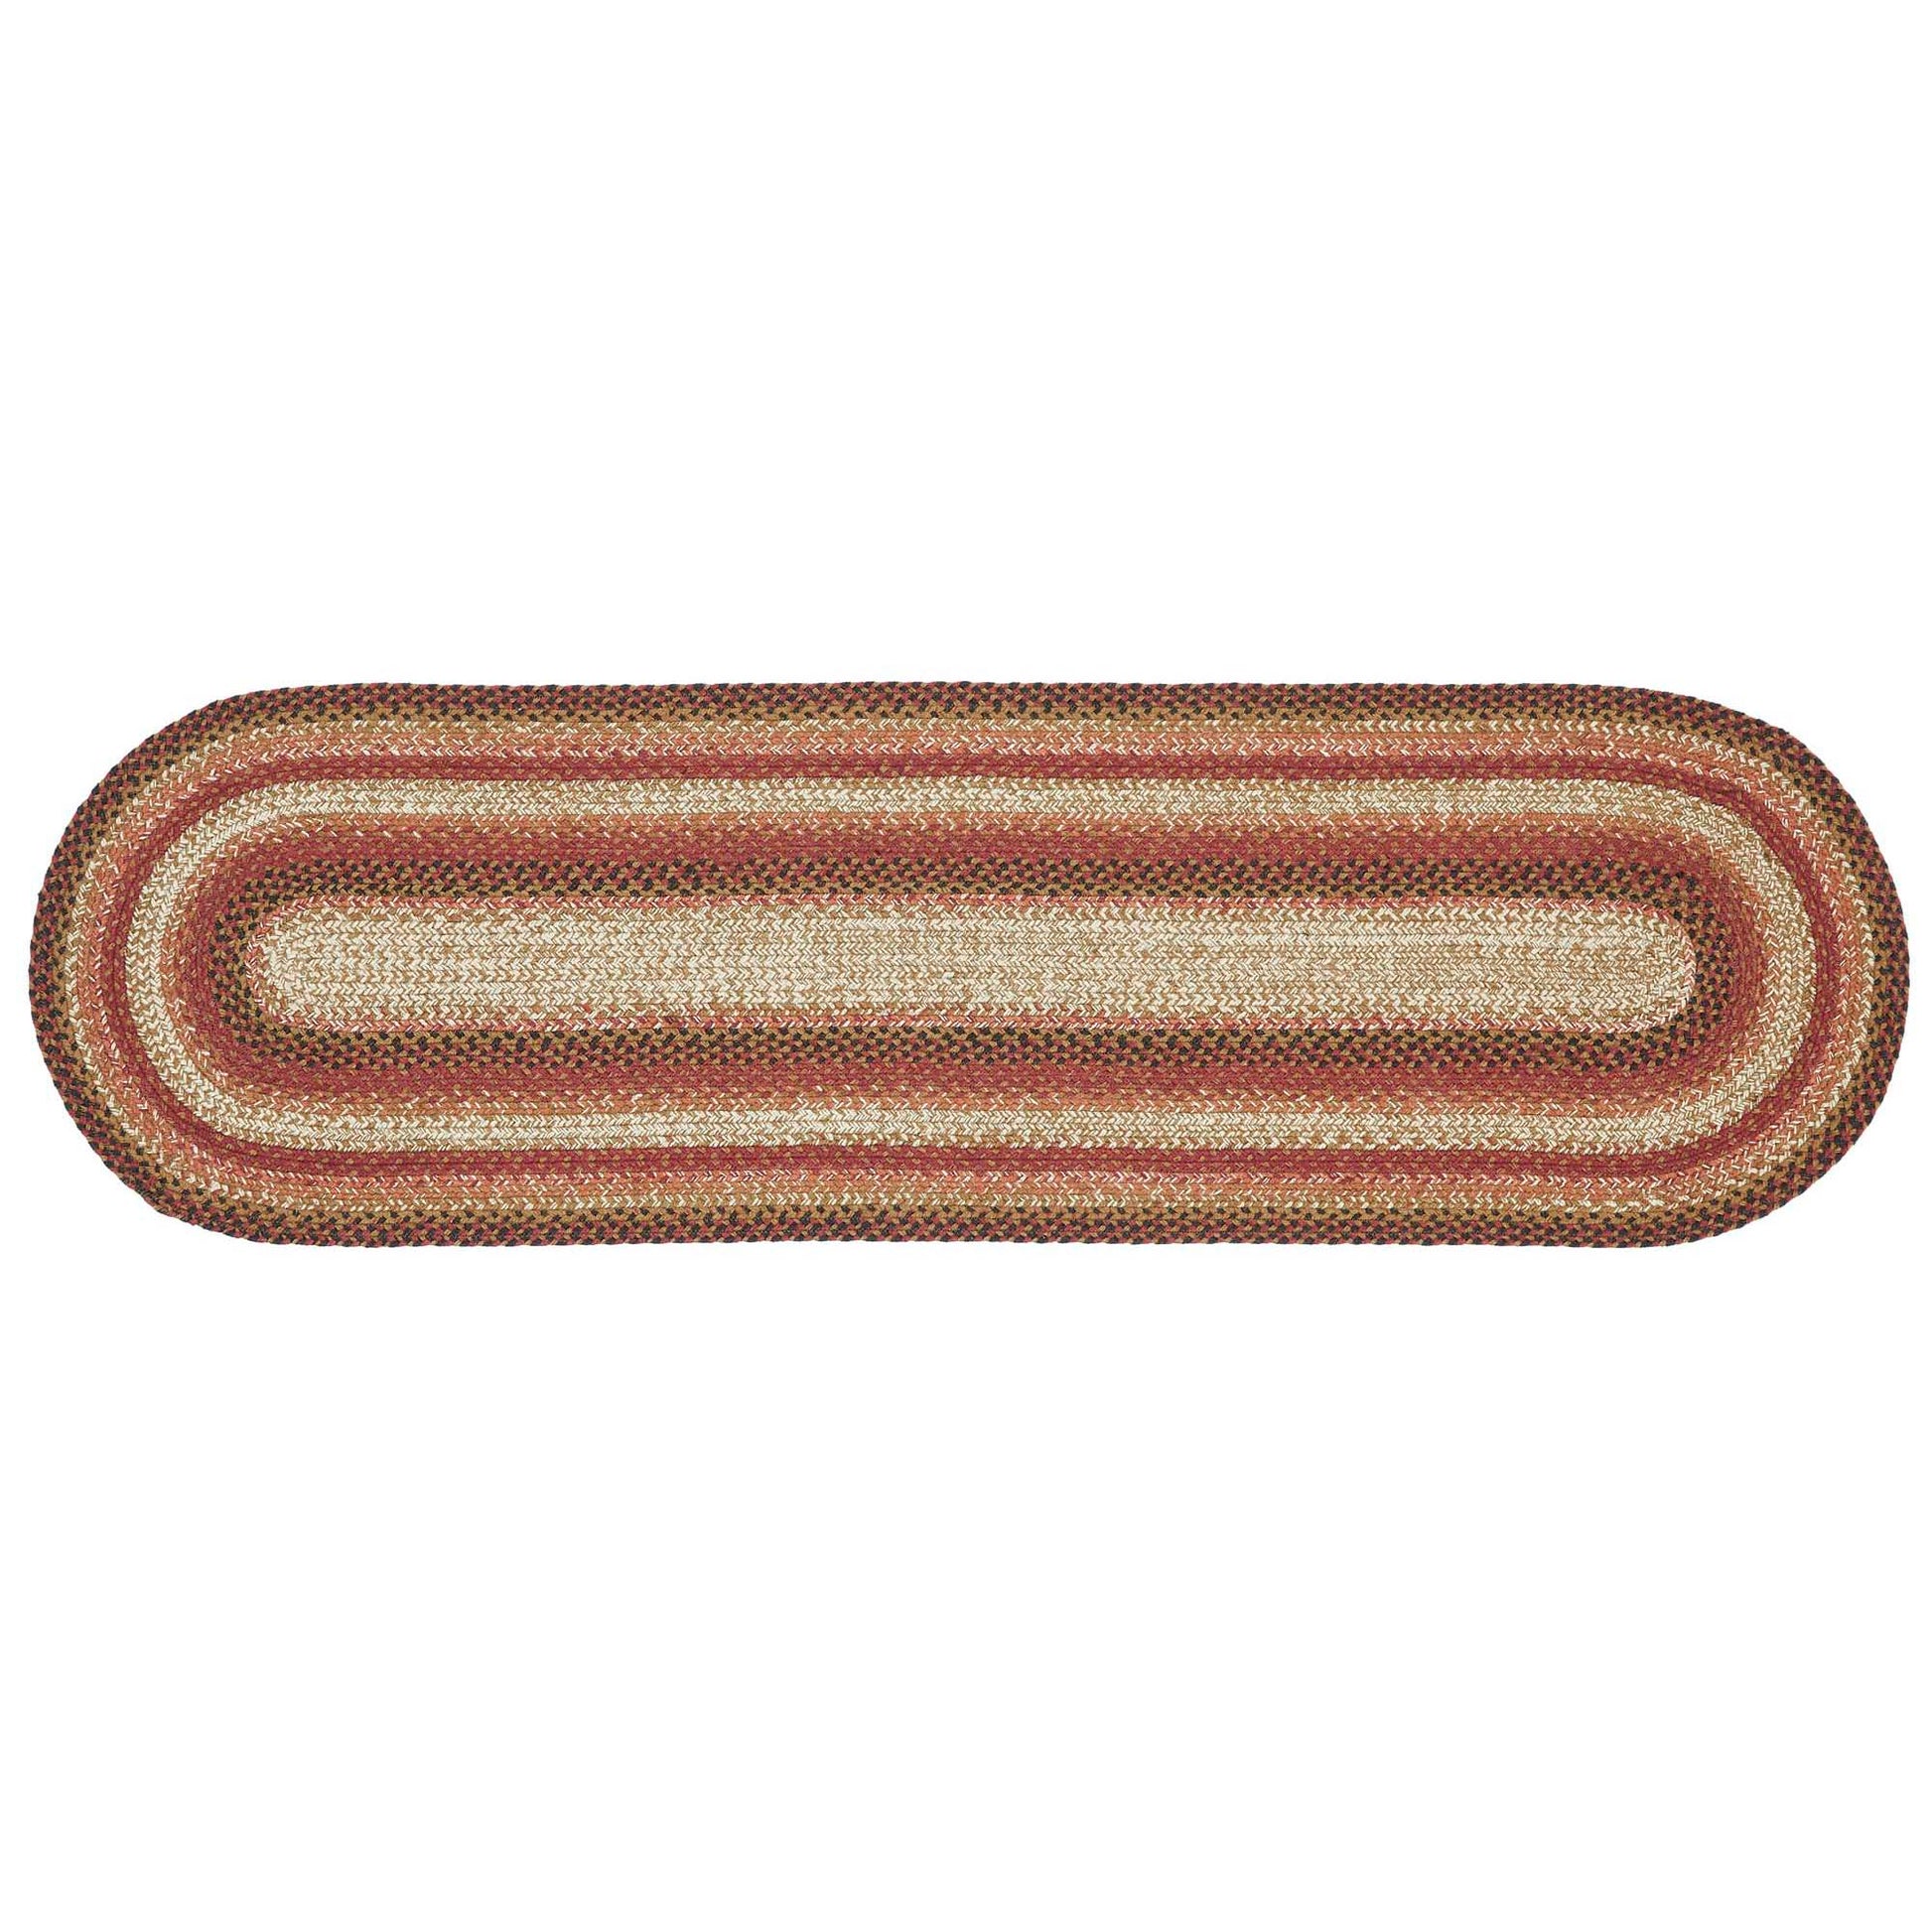 67112-Ginger-Spice-Jute-Rug-Runner-Oval-w-Pad-22x72-image-6